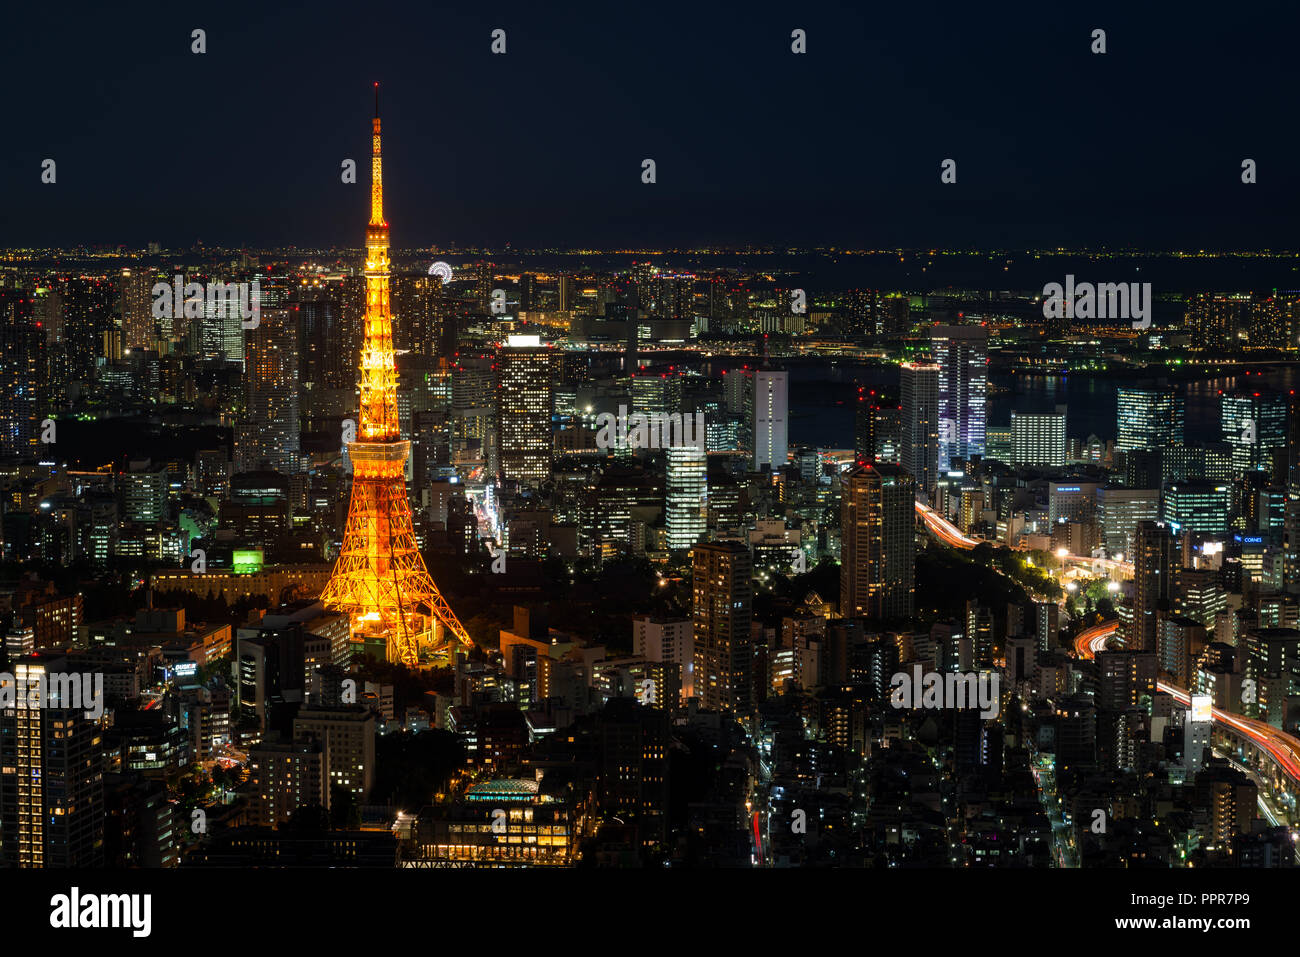 Cityscape of Tokyo at night, as seen from the top of one of the highest buildings in Roppongi Hills, with the illuminated Tokyo Tower glowing. Stock Photo